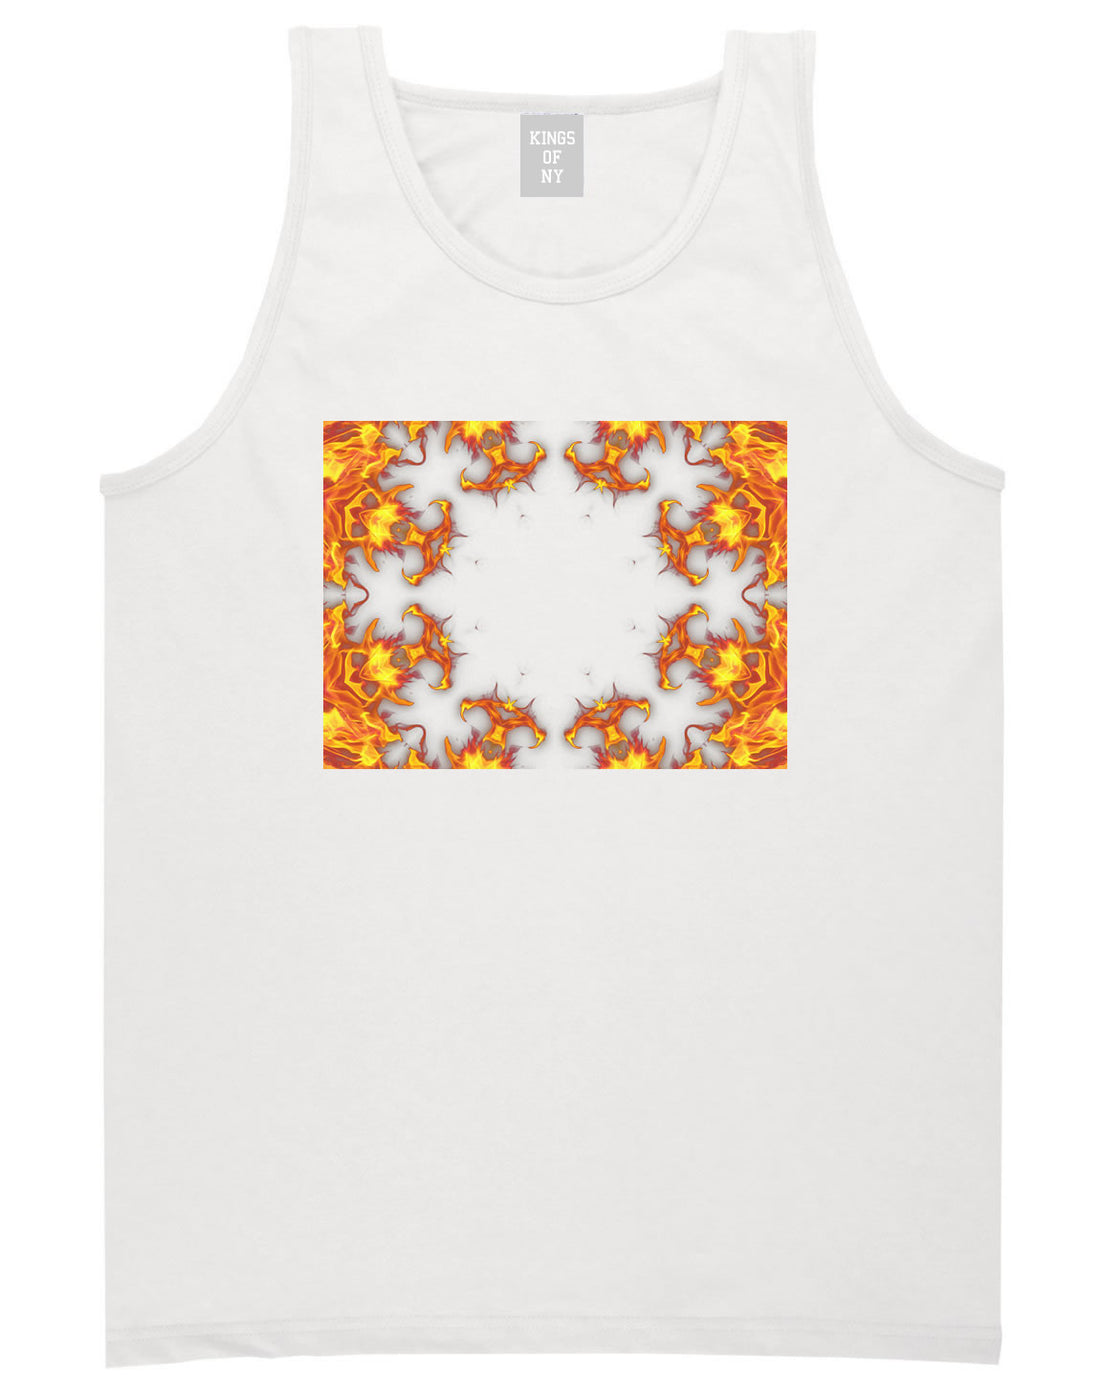 Flames of Fire Gold Frame Tank Top in White By Kings Of NY